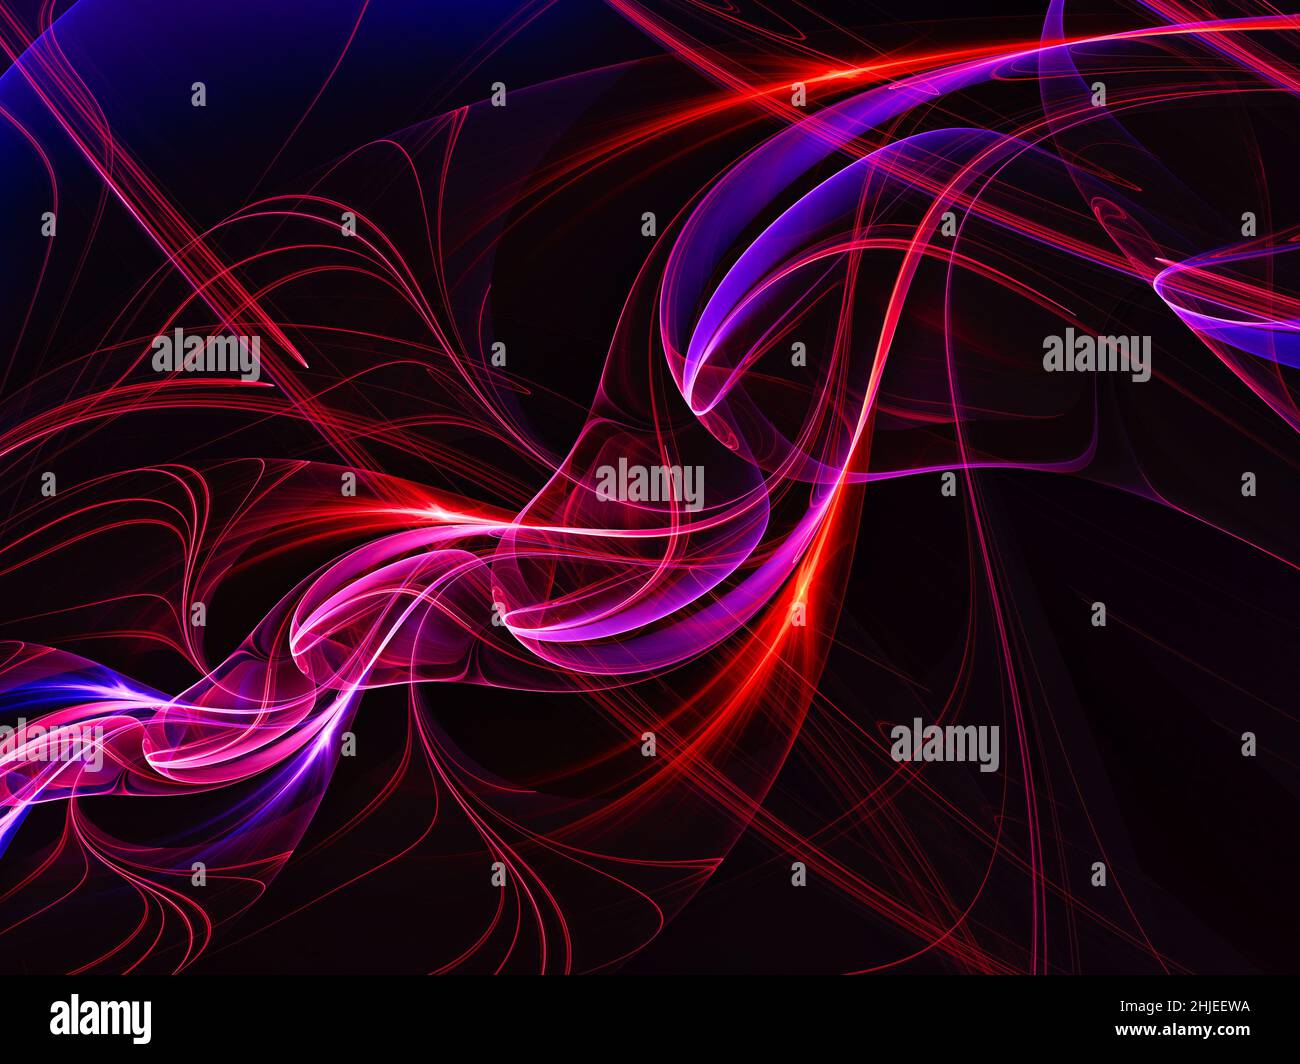 Beautiful background with colored glowing curves - abstract illustration Stock Photo